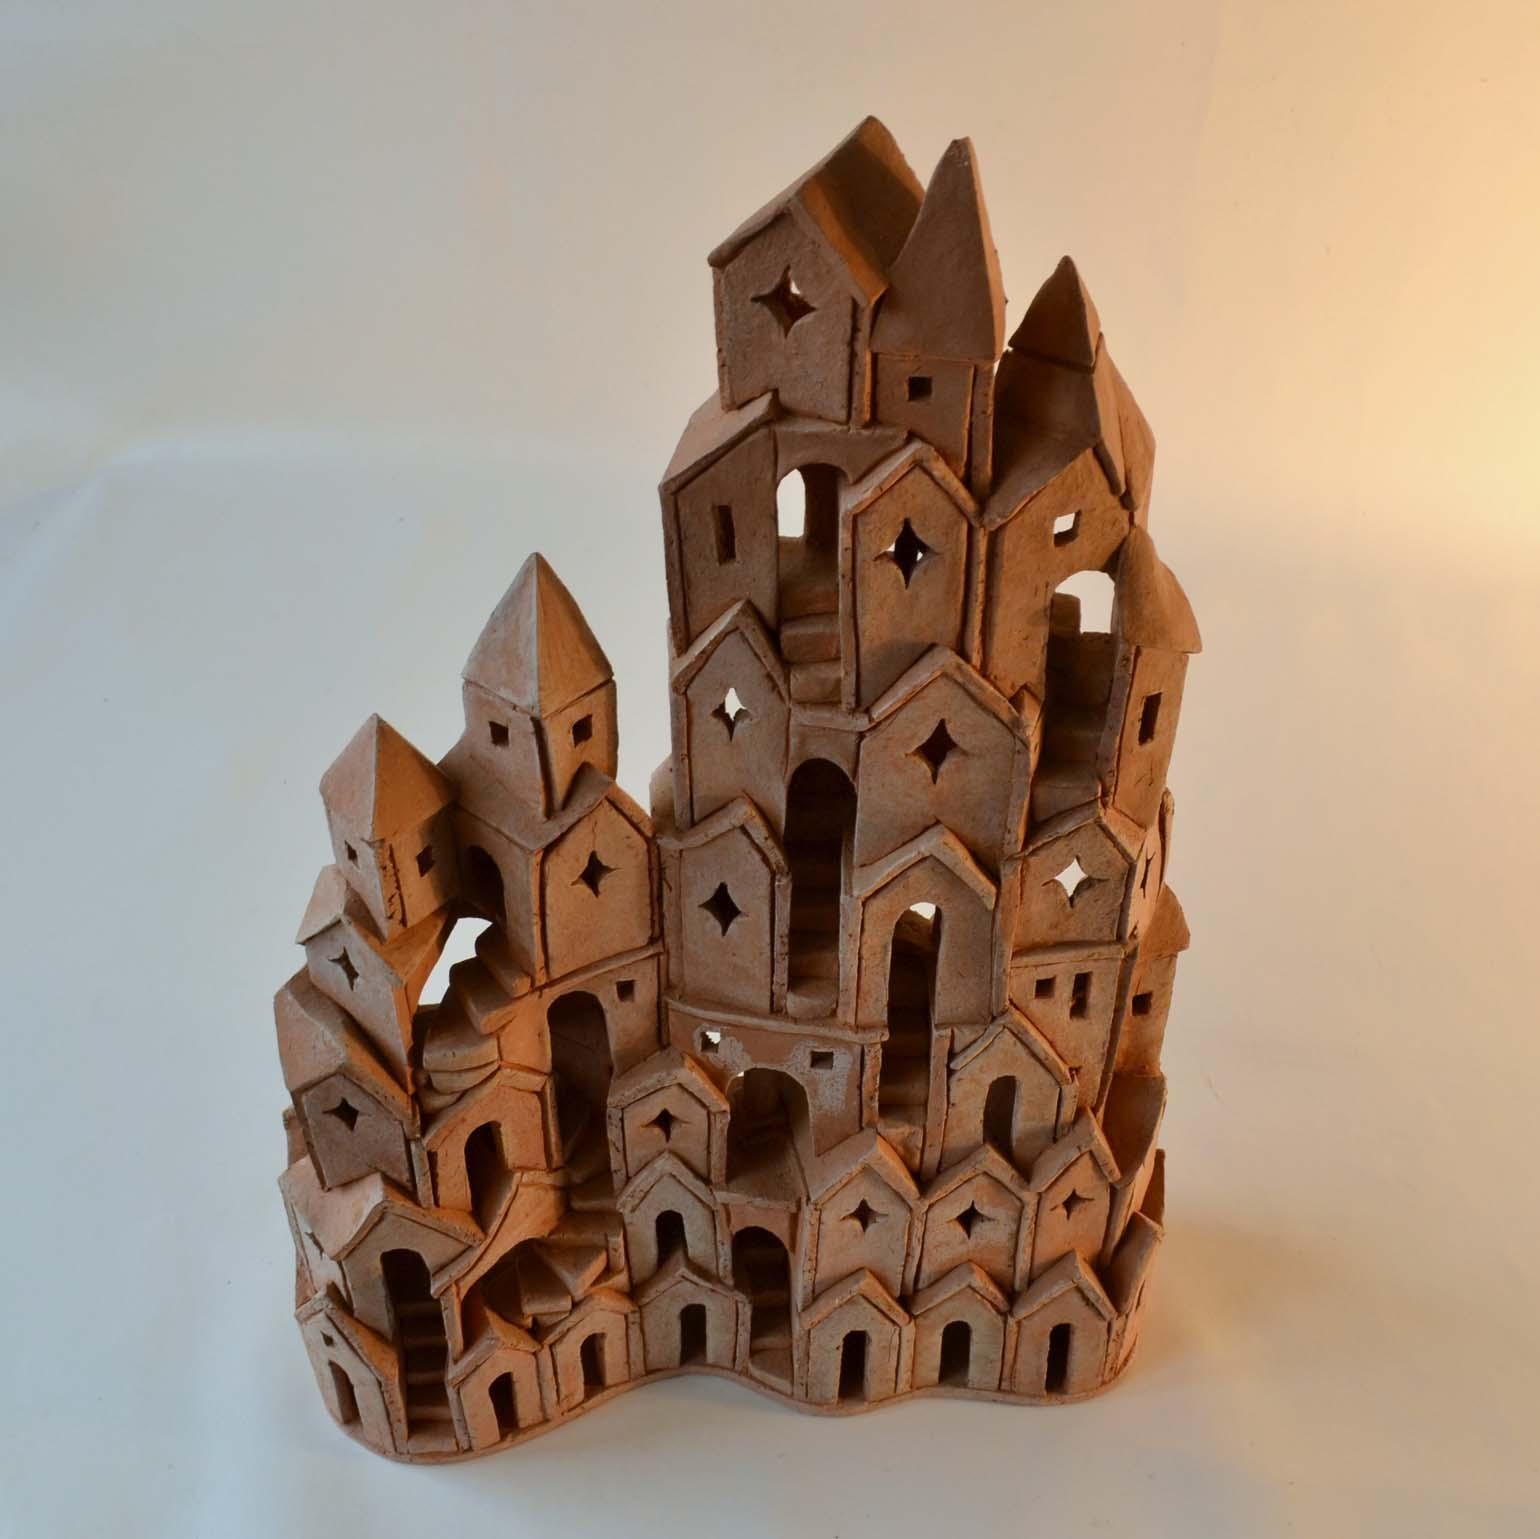 Architectural Surreal Ceramic Tower Sculpture 2 by Dutch Arie Bouter 1995 6